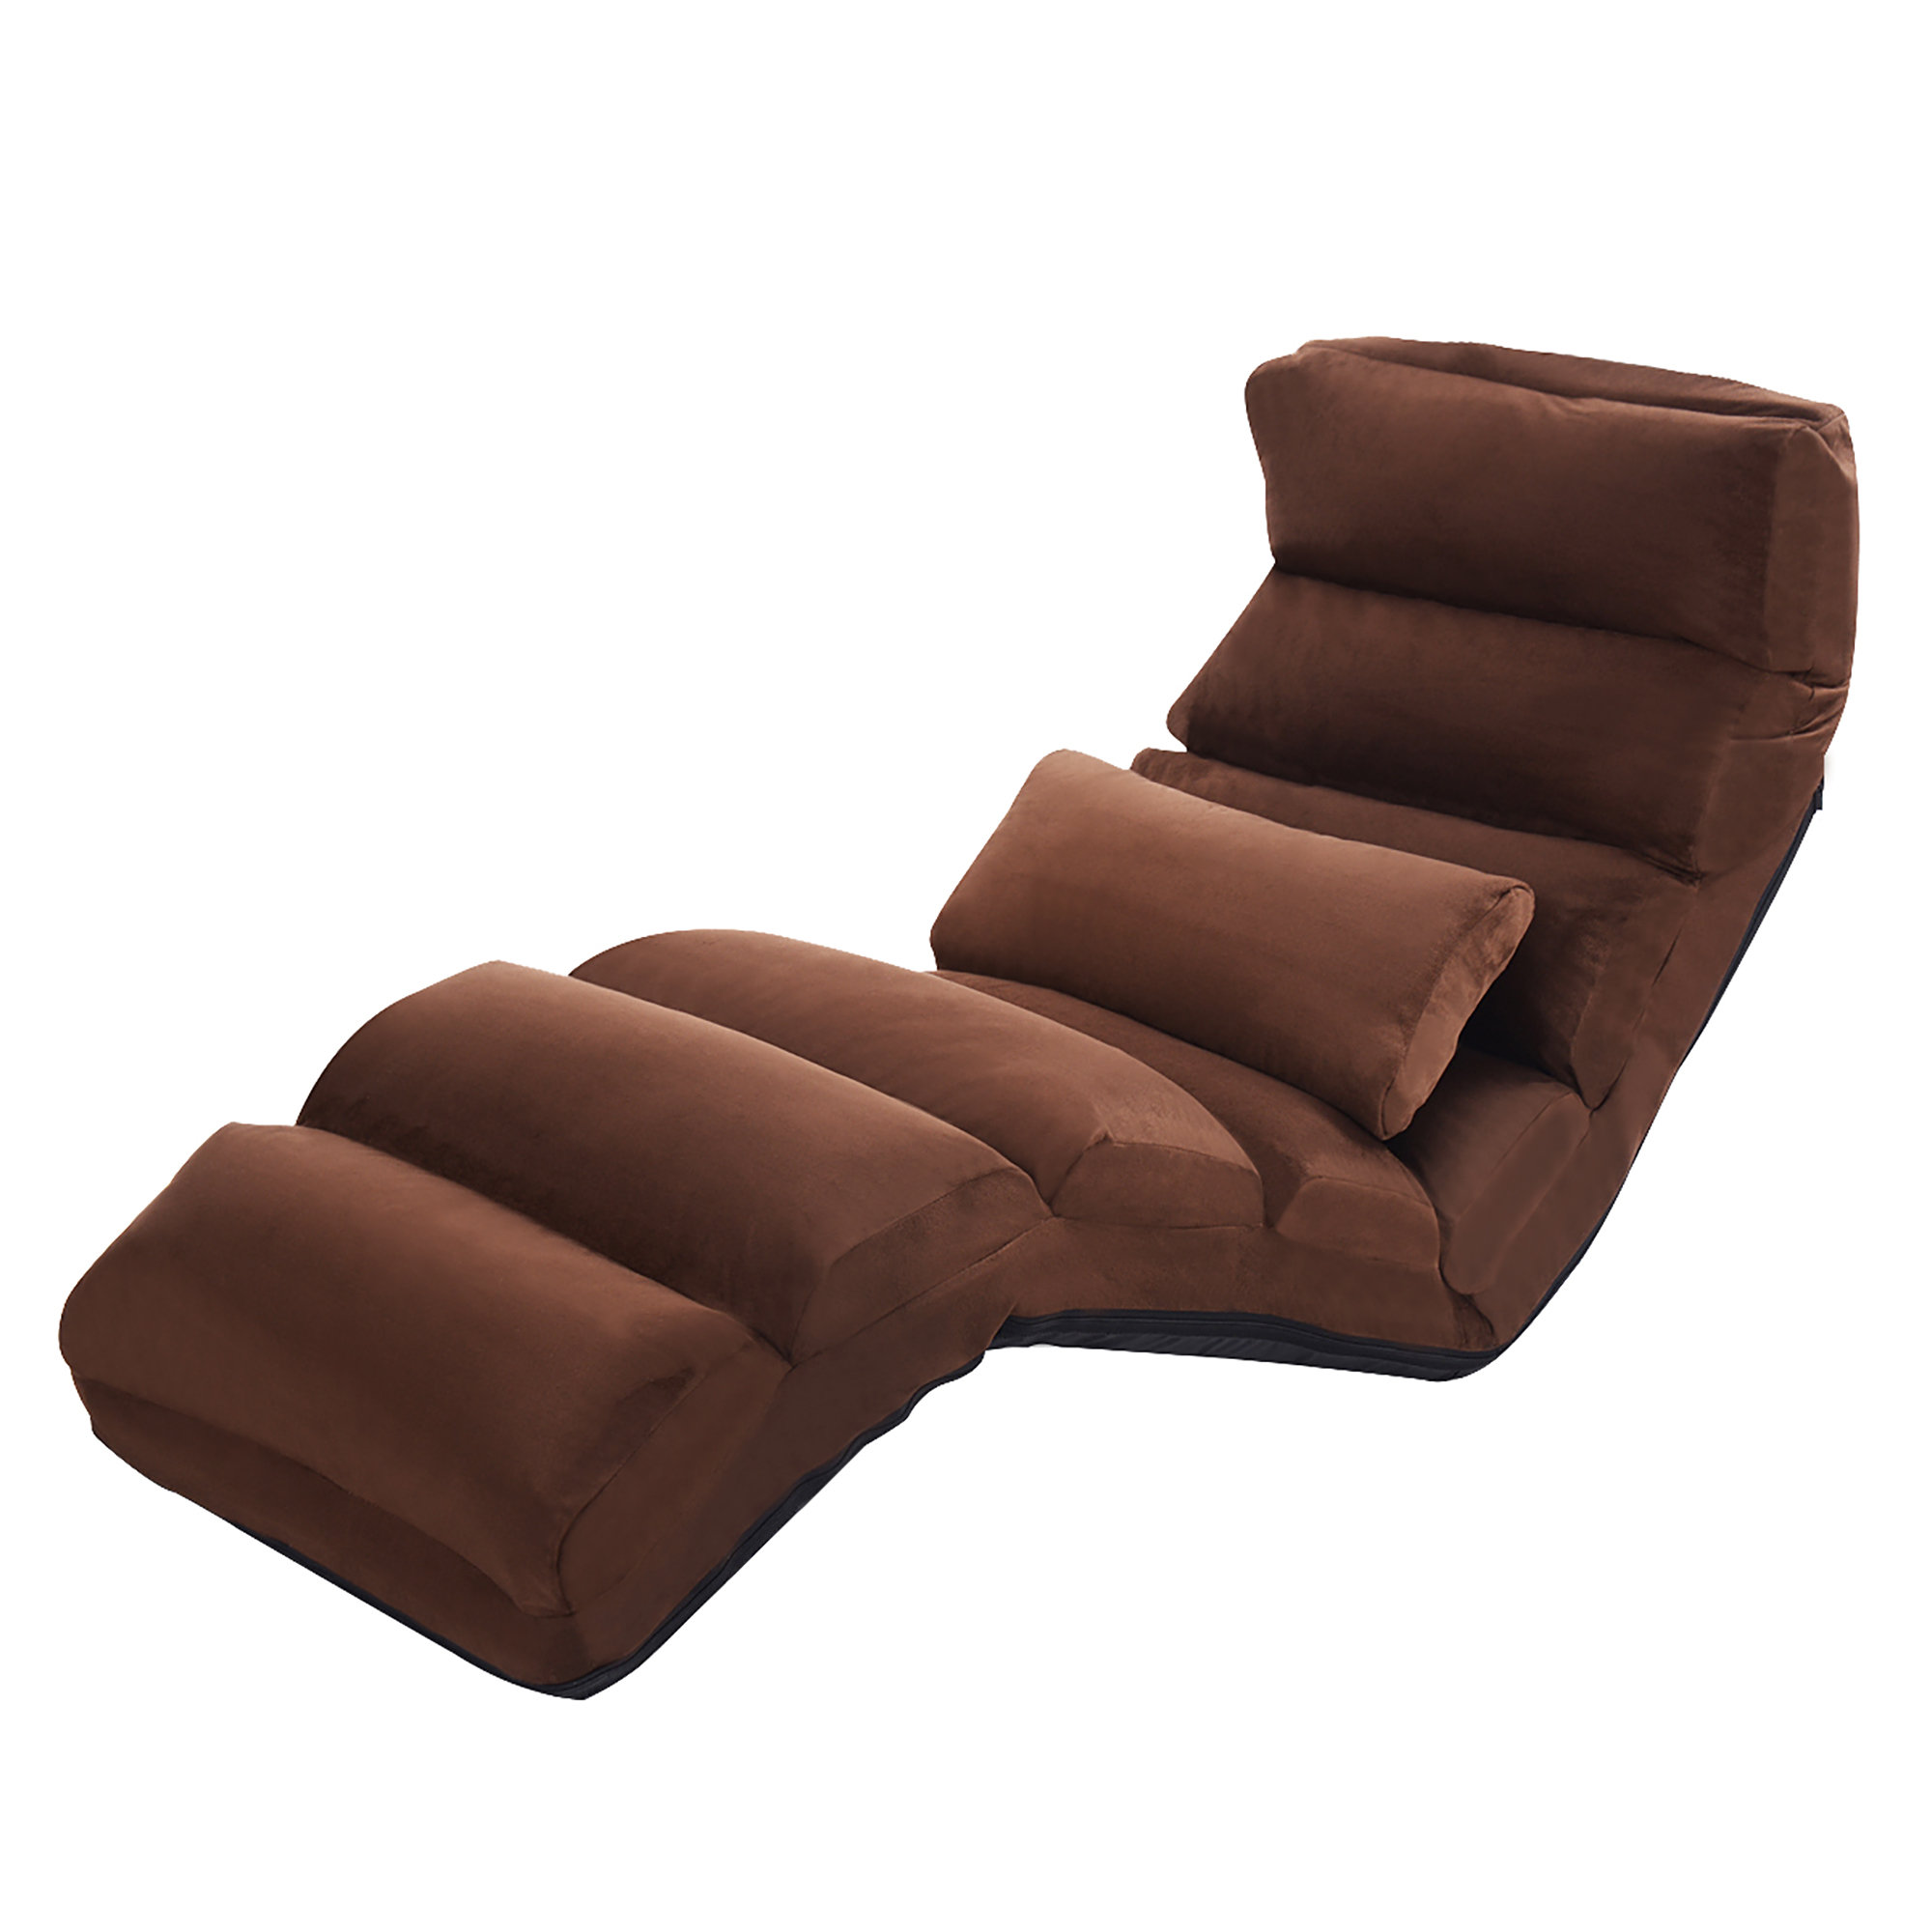 Denchev Upholstered Chaise Lounge